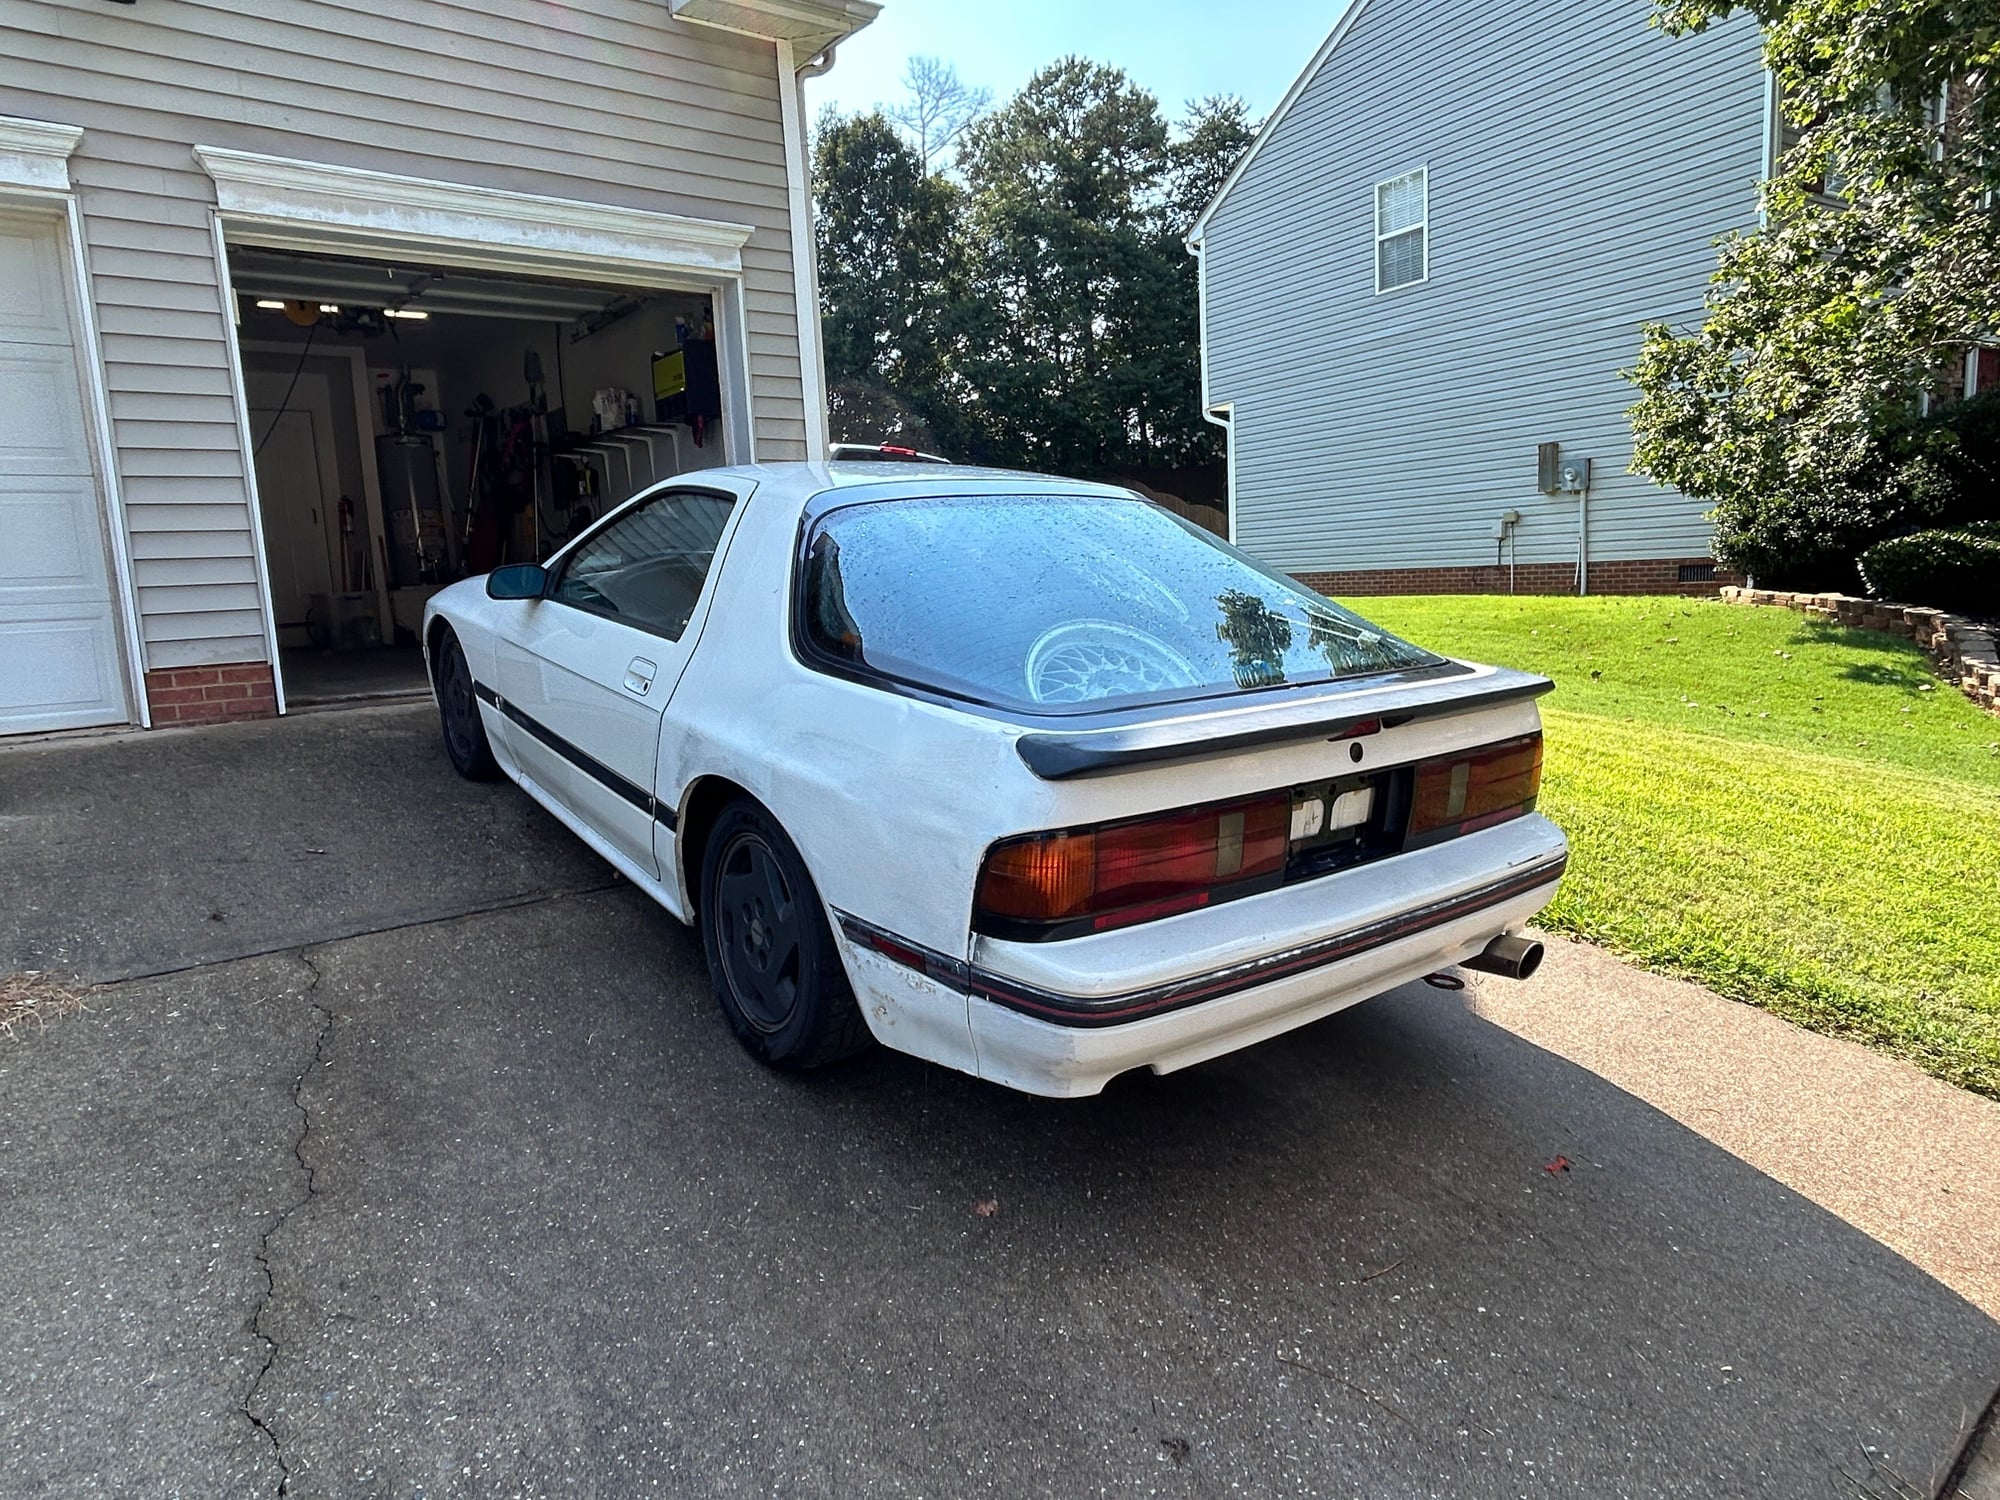 1986 Mazda RX-7 - 1986 RX7 Track Car - Used - VIN JM1FC3312G0114910 - 250,000 Miles - Other - 2WD - Manual - Coupe - White - Greenville, SC 29617, United States